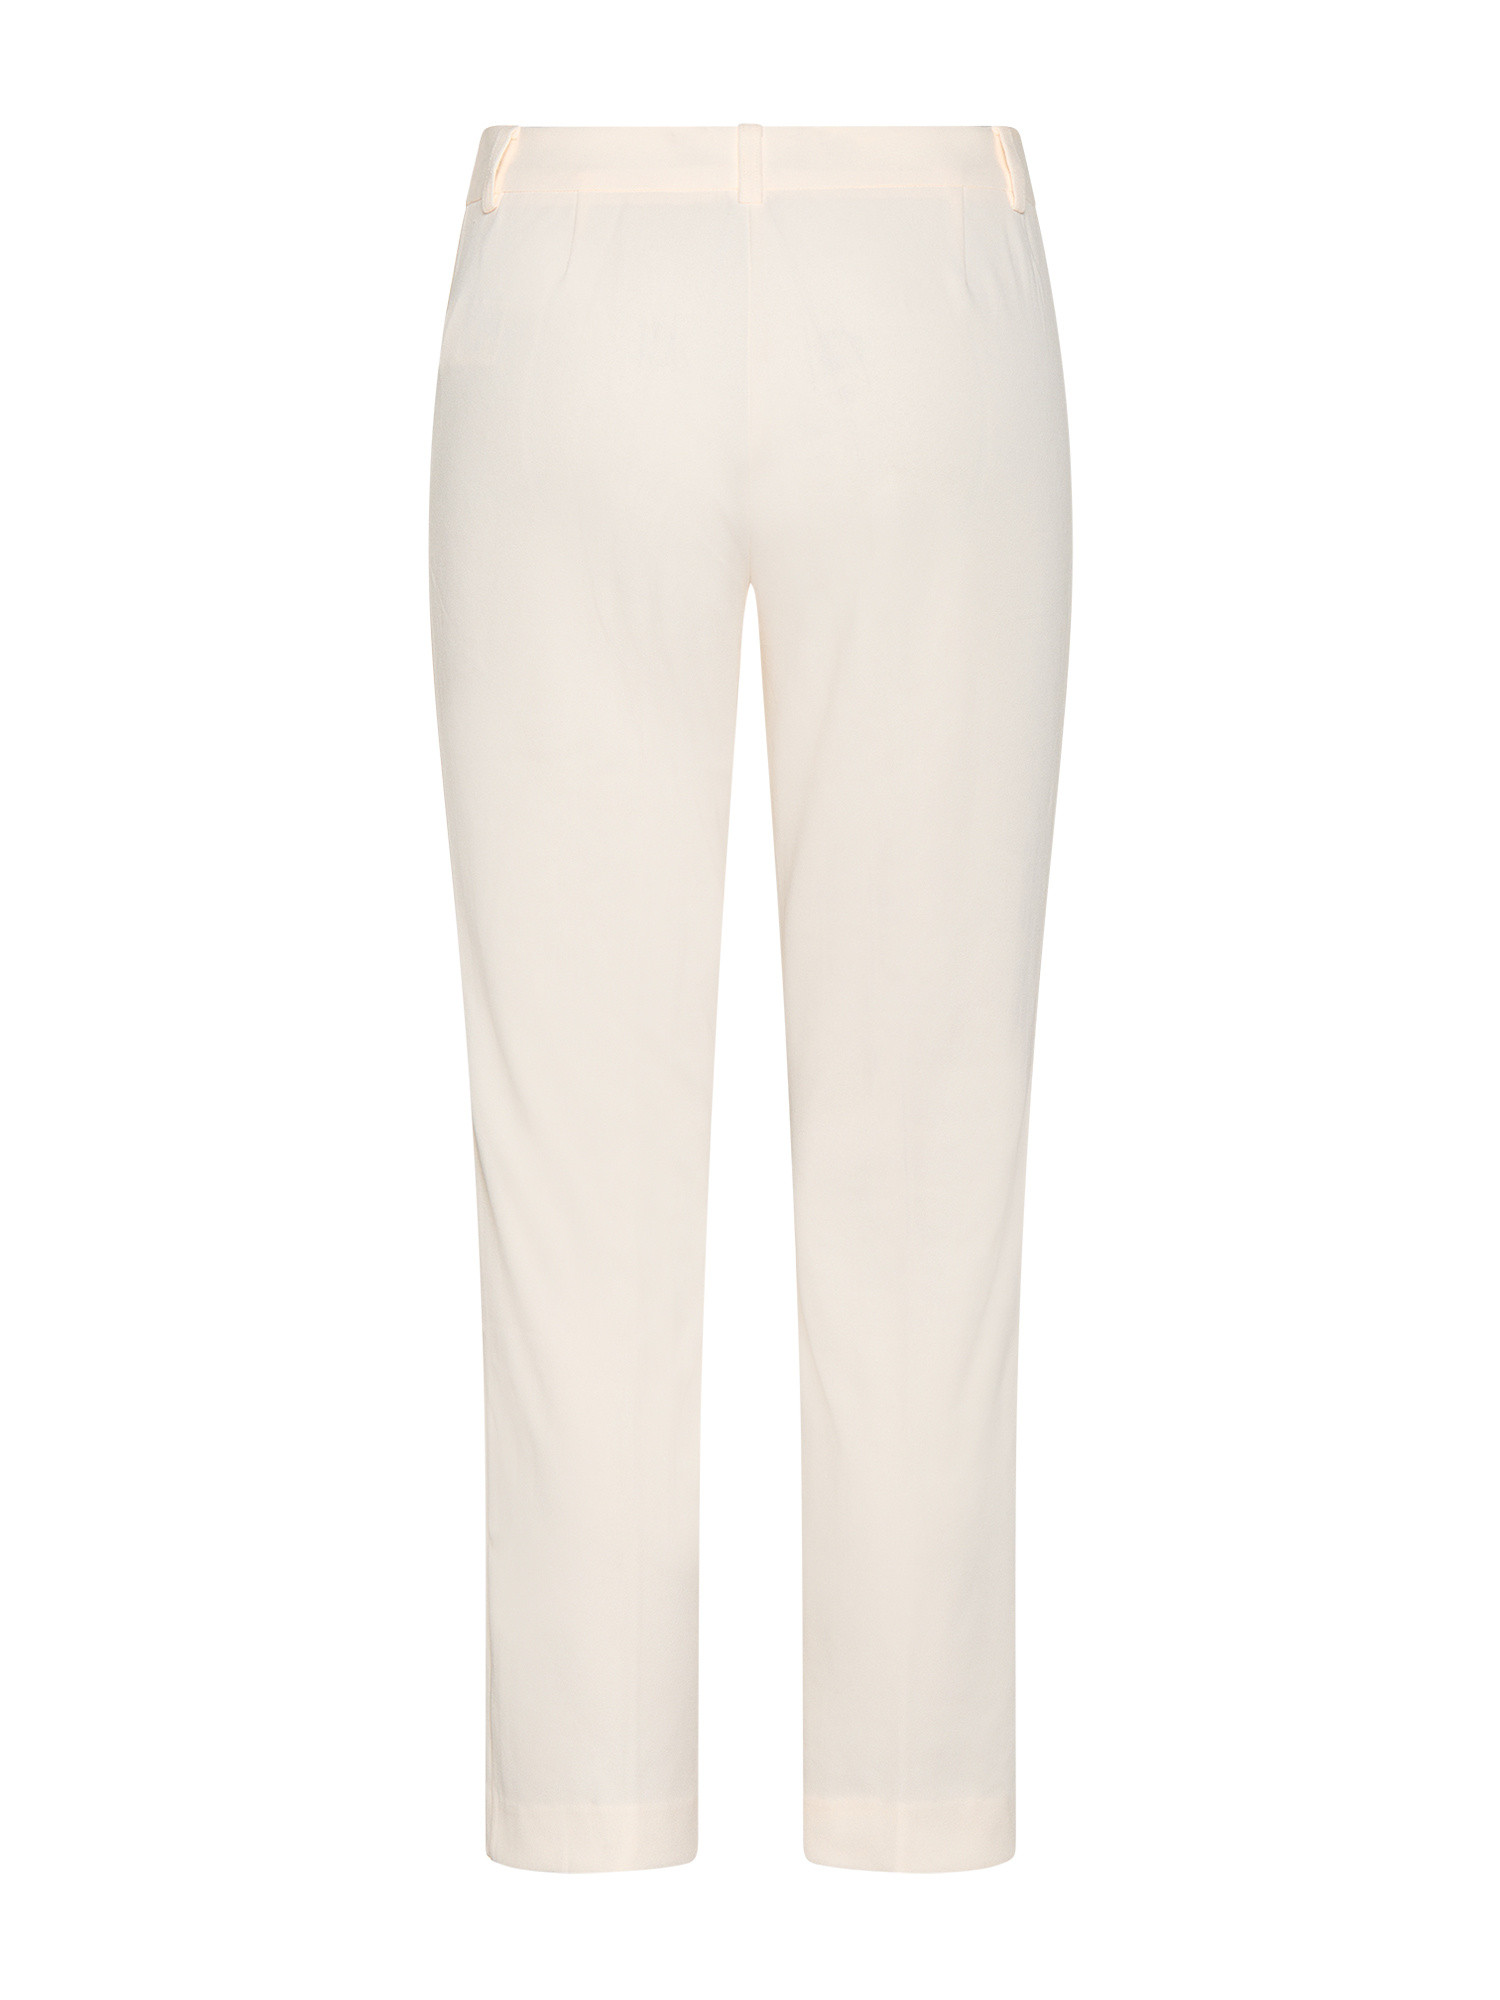 Koan - Crepe flare trousers, White Cream, large image number 1